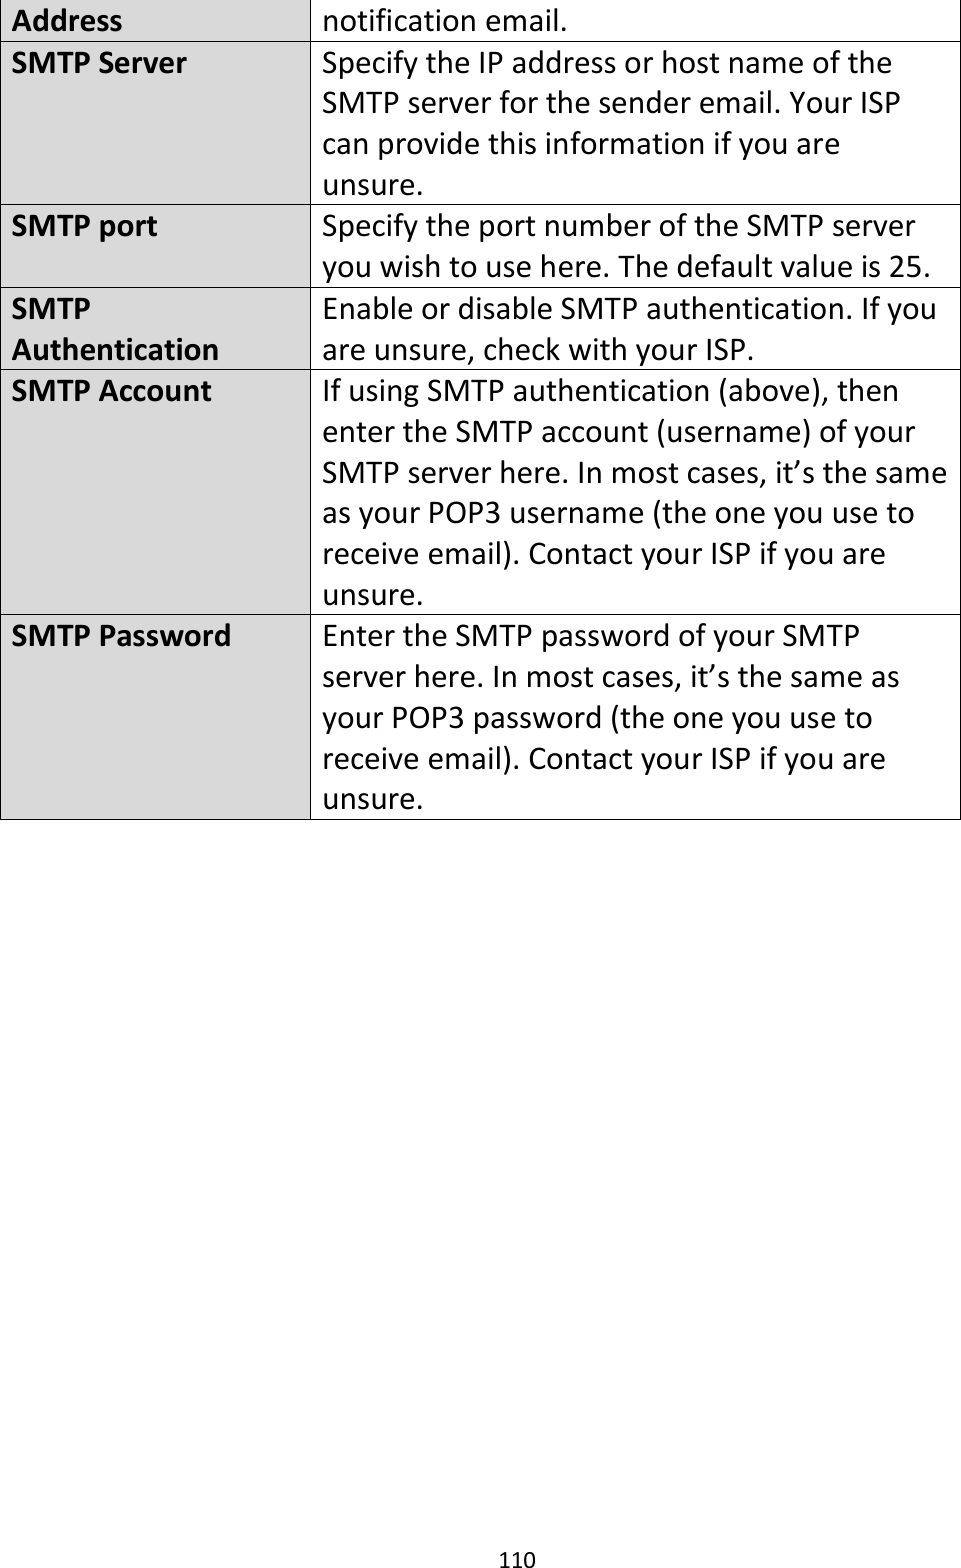 110  Address notification email. SMTP Server Specify the IP address or host name of the SMTP server for the sender email. Your ISP can provide this information if you are unsure. SMTP port Specify the port number of the SMTP server you wish to use here. The default value is 25. SMTP Authentication Enable or disable SMTP authentication. If you are unsure, check with your ISP. SMTP Account If using SMTP authentication (above), then enter the SMTP account (username) of your SMTP server here. In most cases, it’s the same as your POP3 username (the one you use to receive email). Contact your ISP if you are unsure. SMTP Password Enter the SMTP password of your SMTP server here. In most cases, it’s the same as your POP3 password (the one you use to receive email). Contact your ISP if you are unsure.  